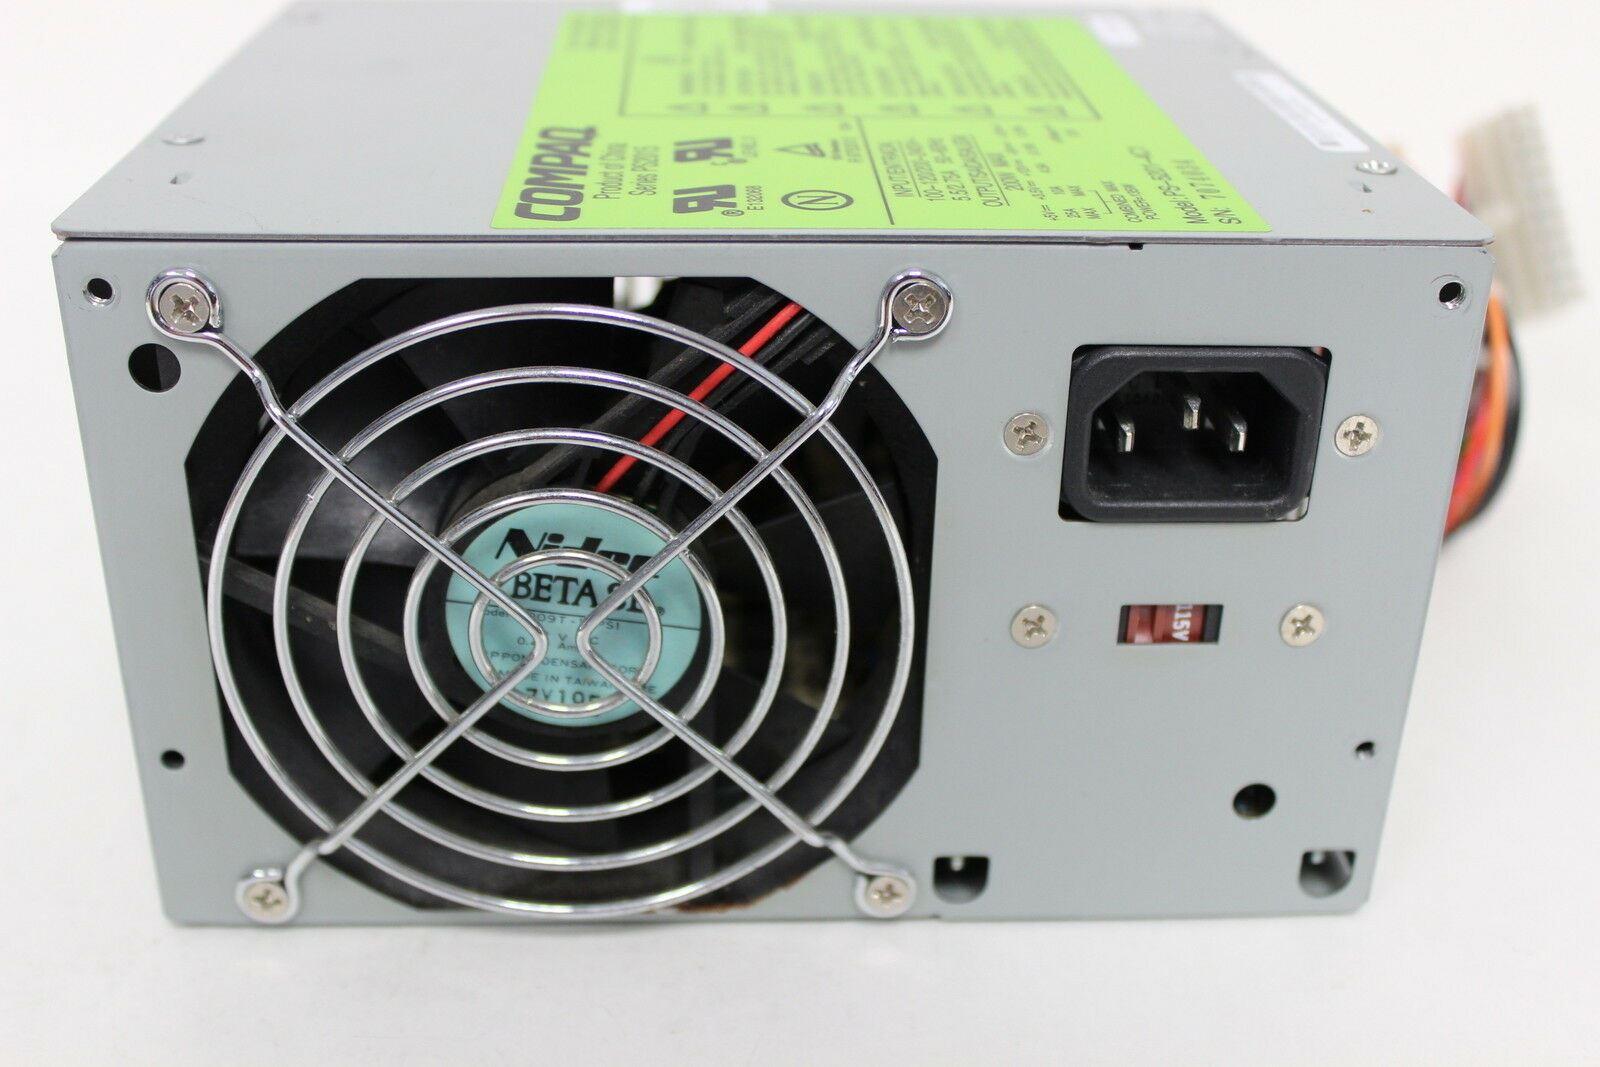 166569 001 PS 5201 4C1 166572 001 switching power supply 110 240vac input 45 66hz 4 dc outputs 200 watts no longer supplied